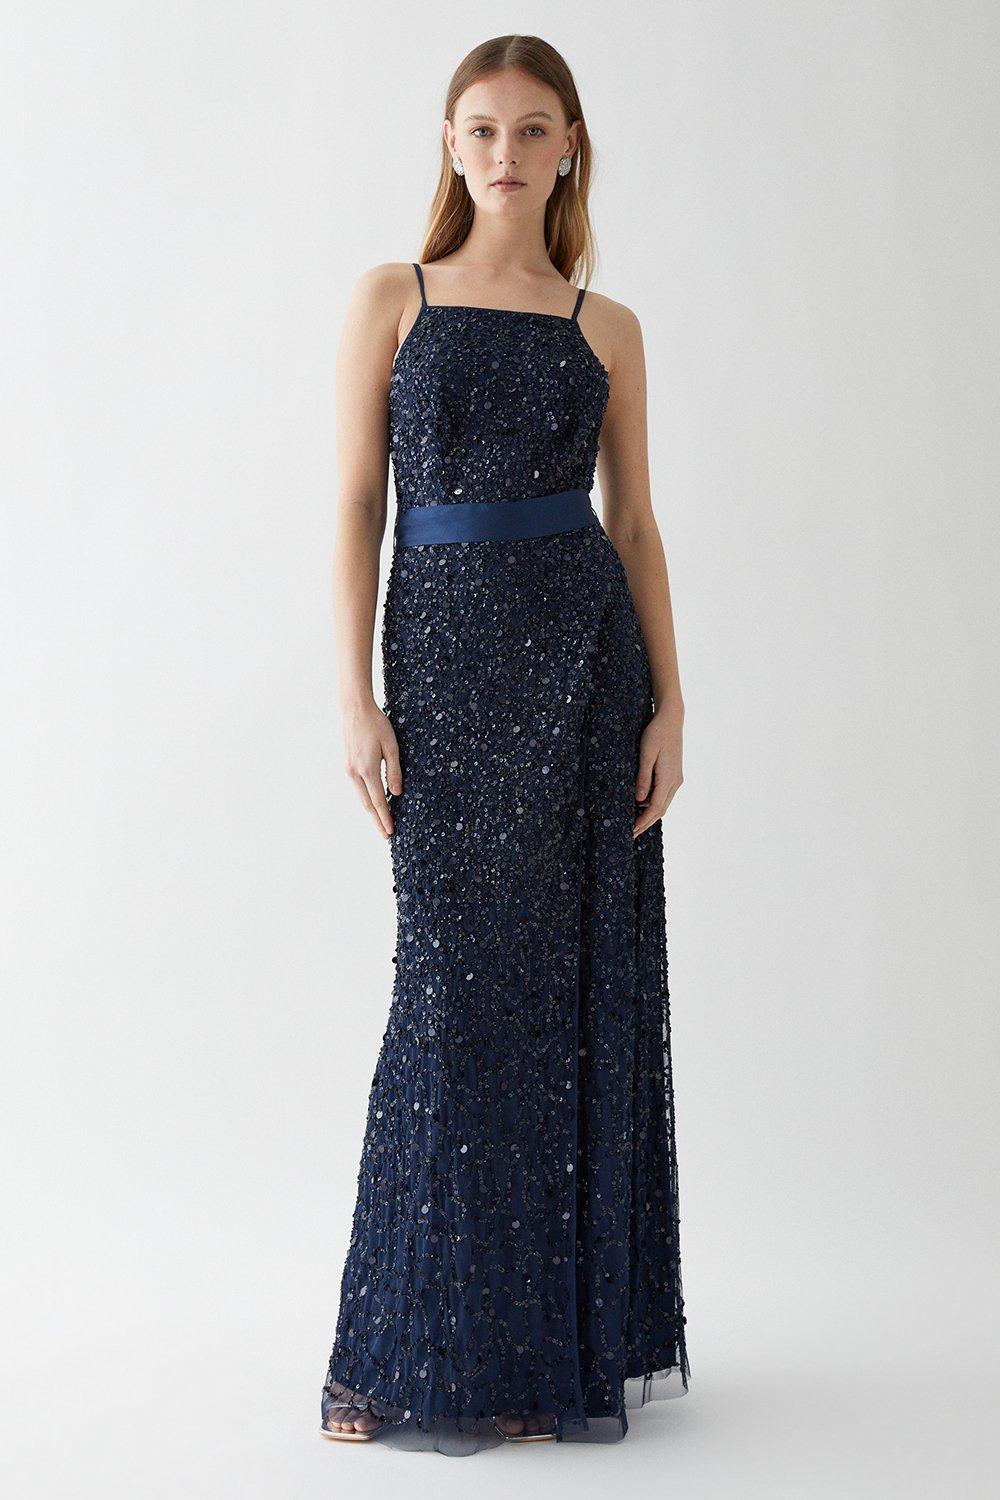 Strappy Sequin Wrap Skirt Bridesmaids Dress With Belt - Navy